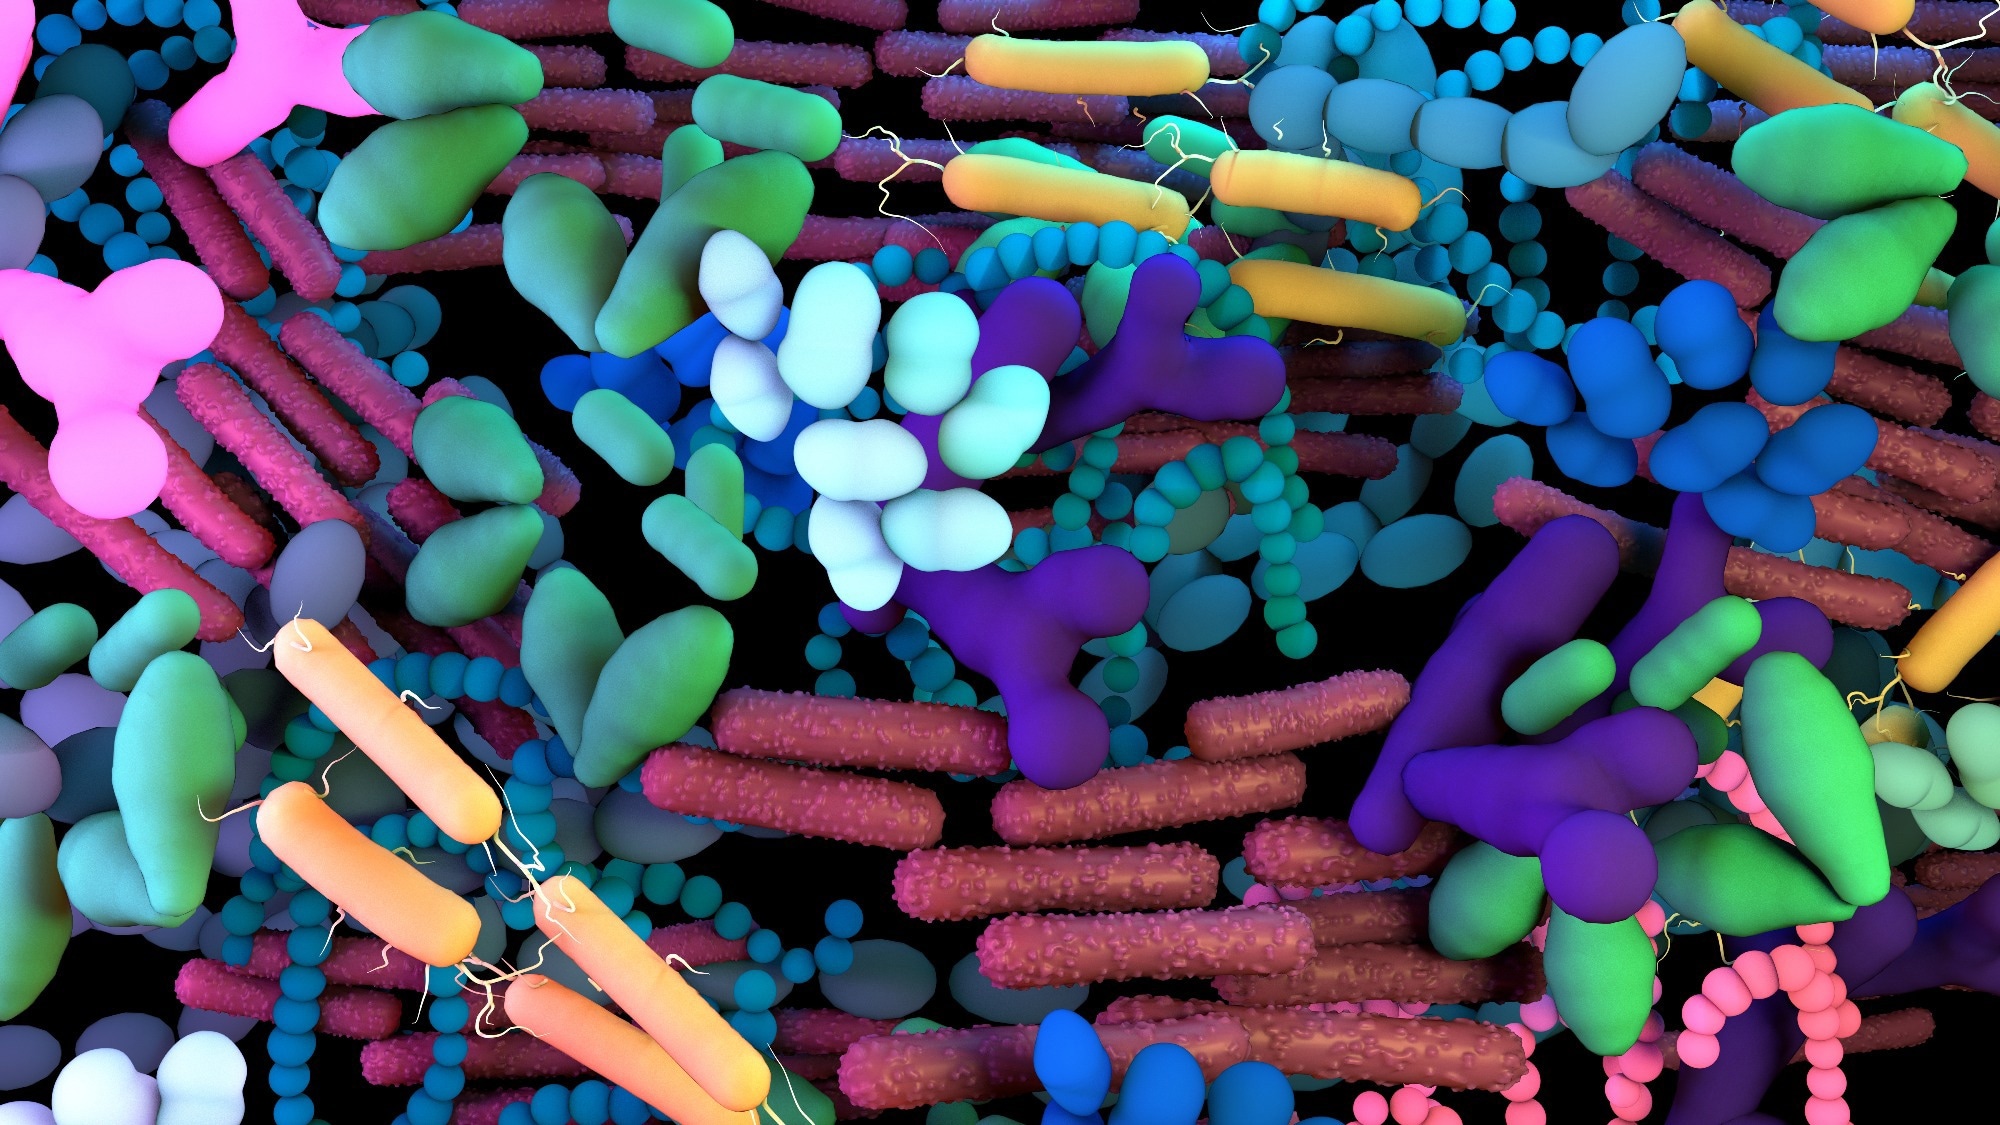 Study: The person-to-person transmission landscape of the gut and oral microbiomes. Image Credit: Design_Cells/Shutterstock